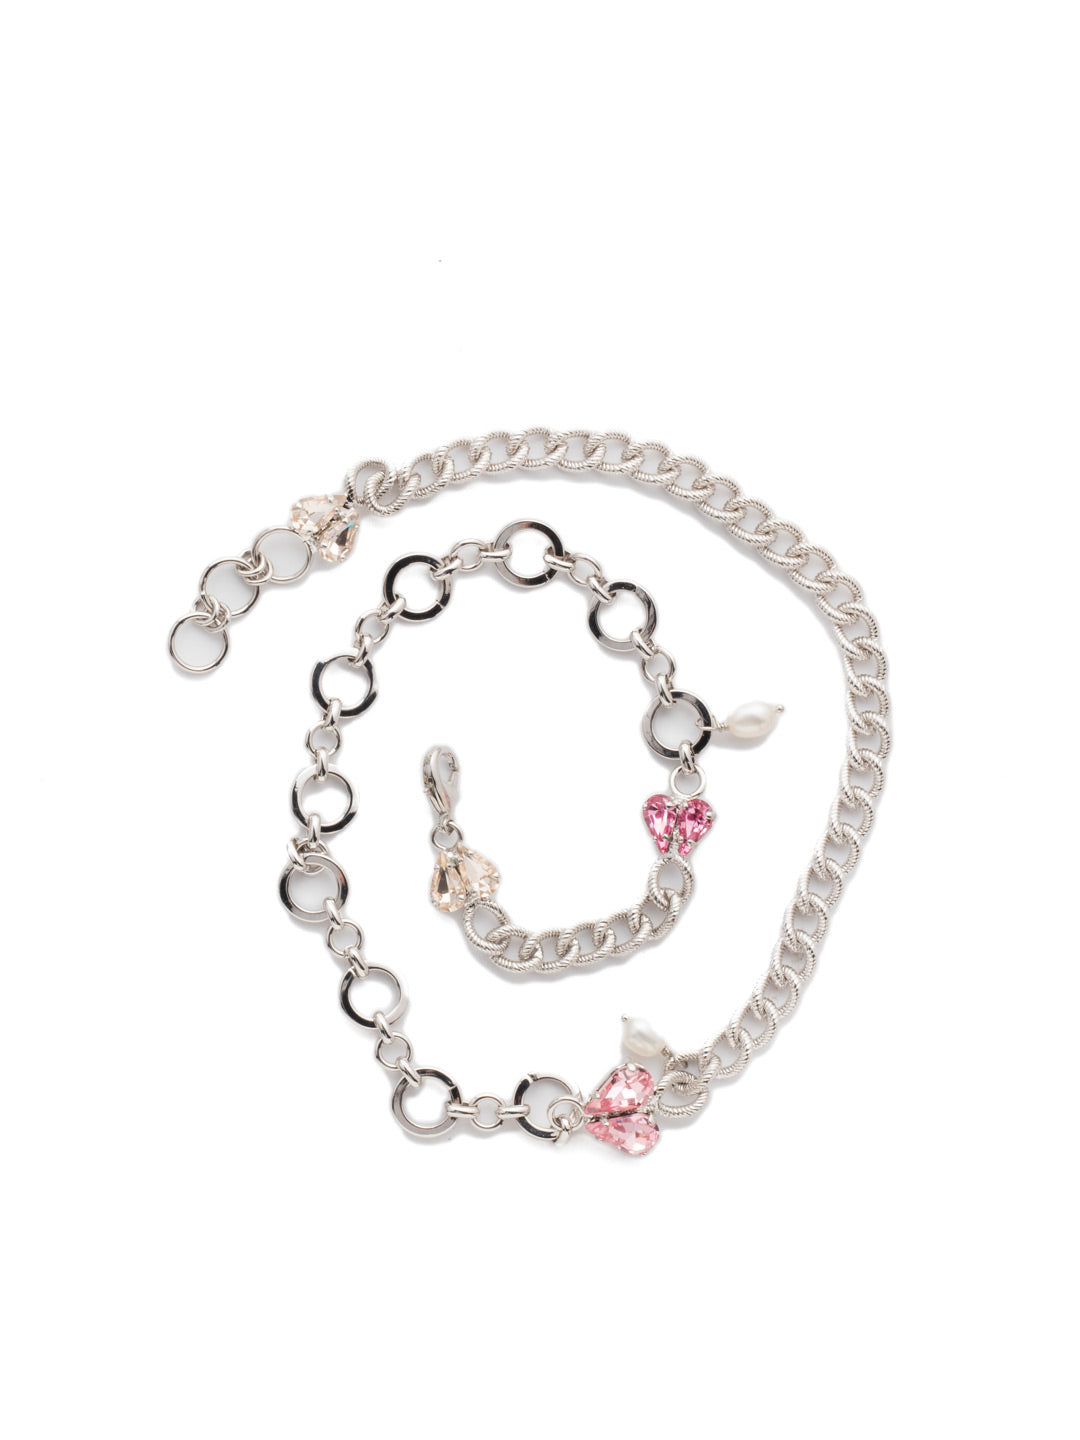 Laguna Wrap Bracelet - BER5RHPOM - <p>Loop on the Laguna Wrap Bracelet for an edgy metallic look softened by drips of freshwater pearl and pear-shaped shimmering crystals forming sweet heart shapes. From Sorrelli's Pink Ombre collection in our Palladium Silver-tone finish.</p>